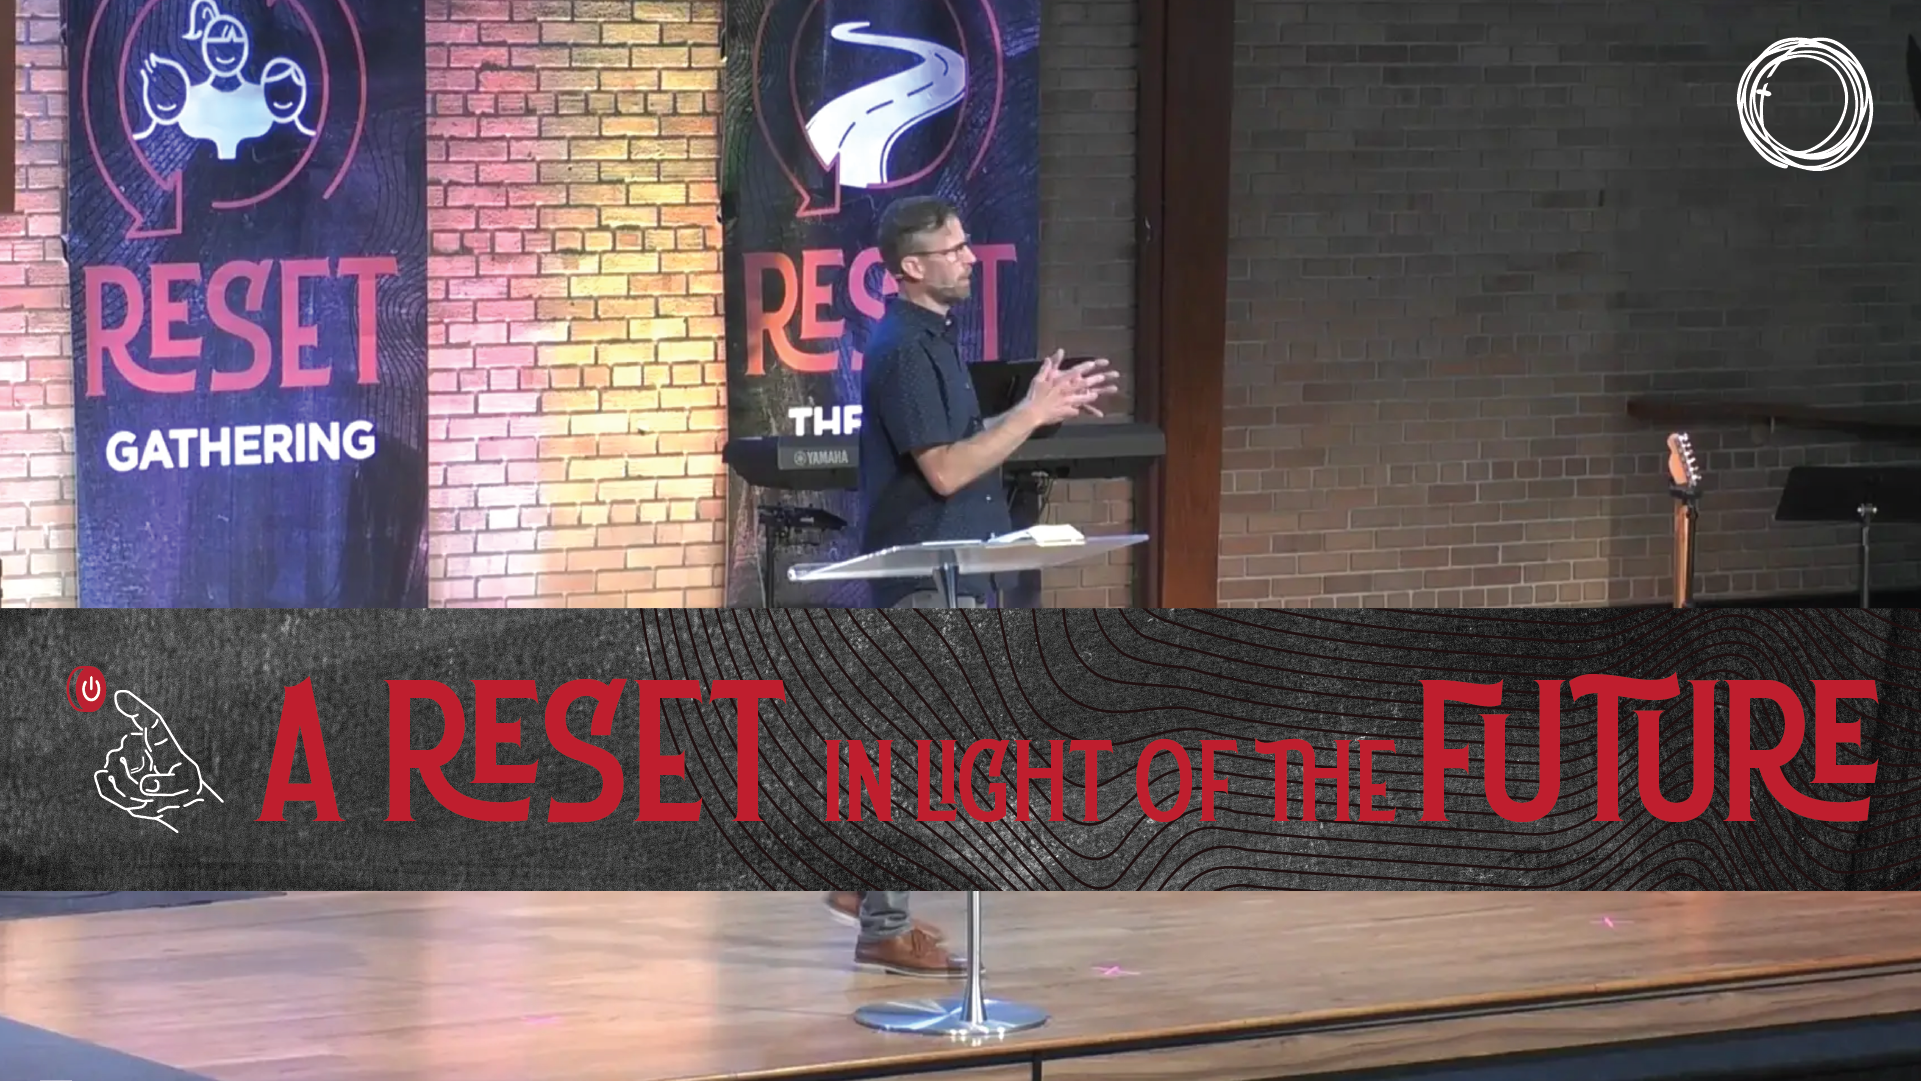 A Reset in light of the Future